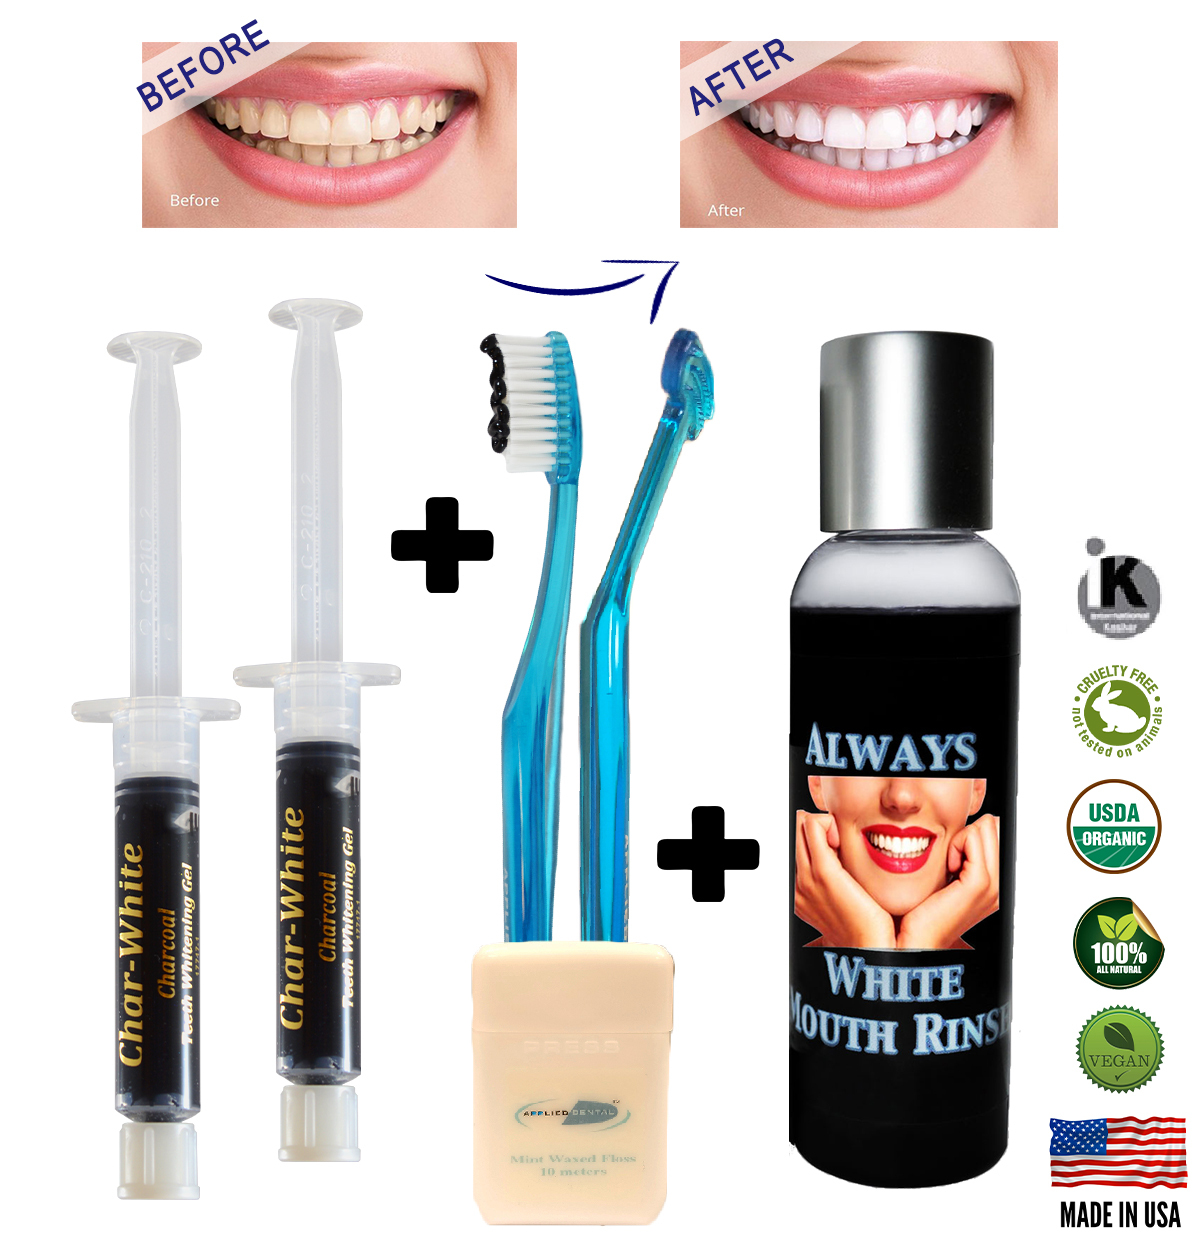  New Organic Fresh Mint Activated Charcoal Natural Teeth Whitening Gel Usa Made  - $14.45